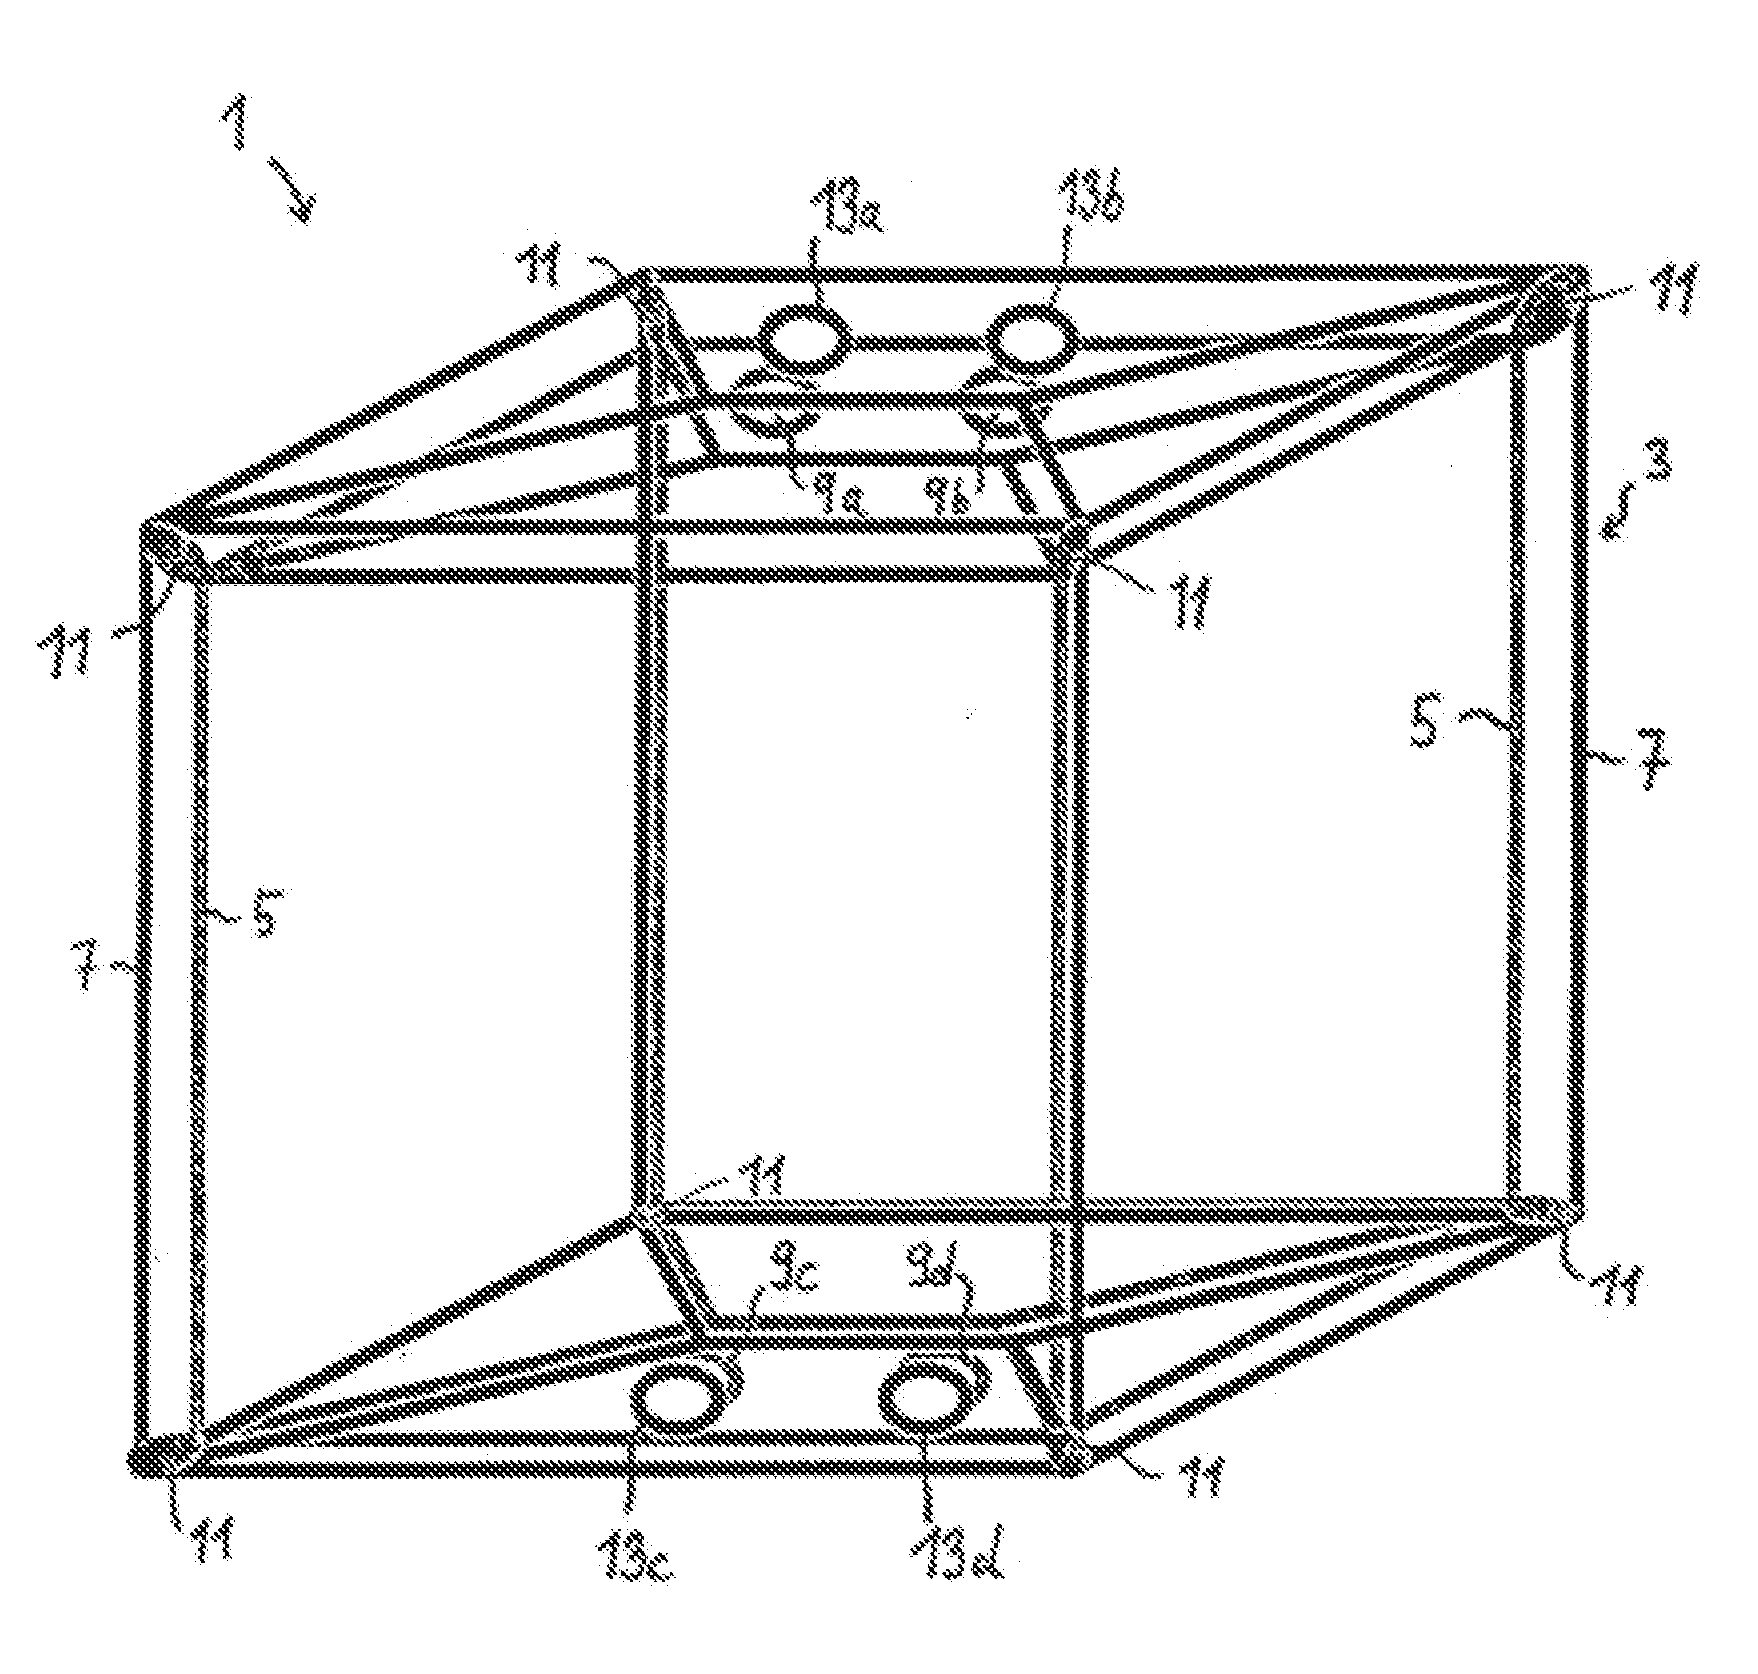 Bioreactor container and integrity check method for bioreactor containers